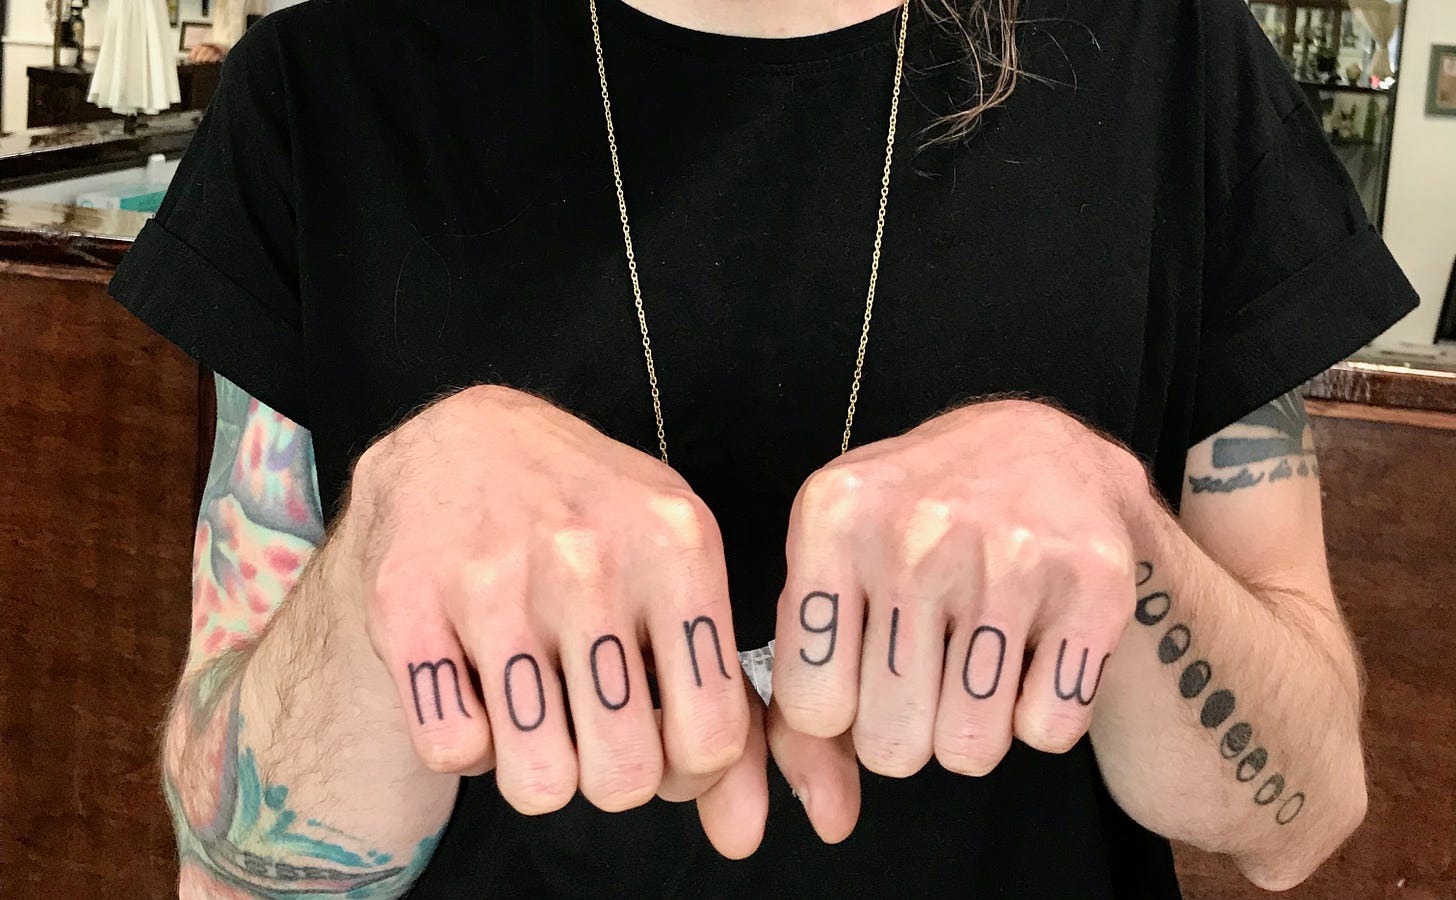 Emme wears a black t-shirt, with her hands in front. MOONGLOW written on her knuckles, freshly tattooed